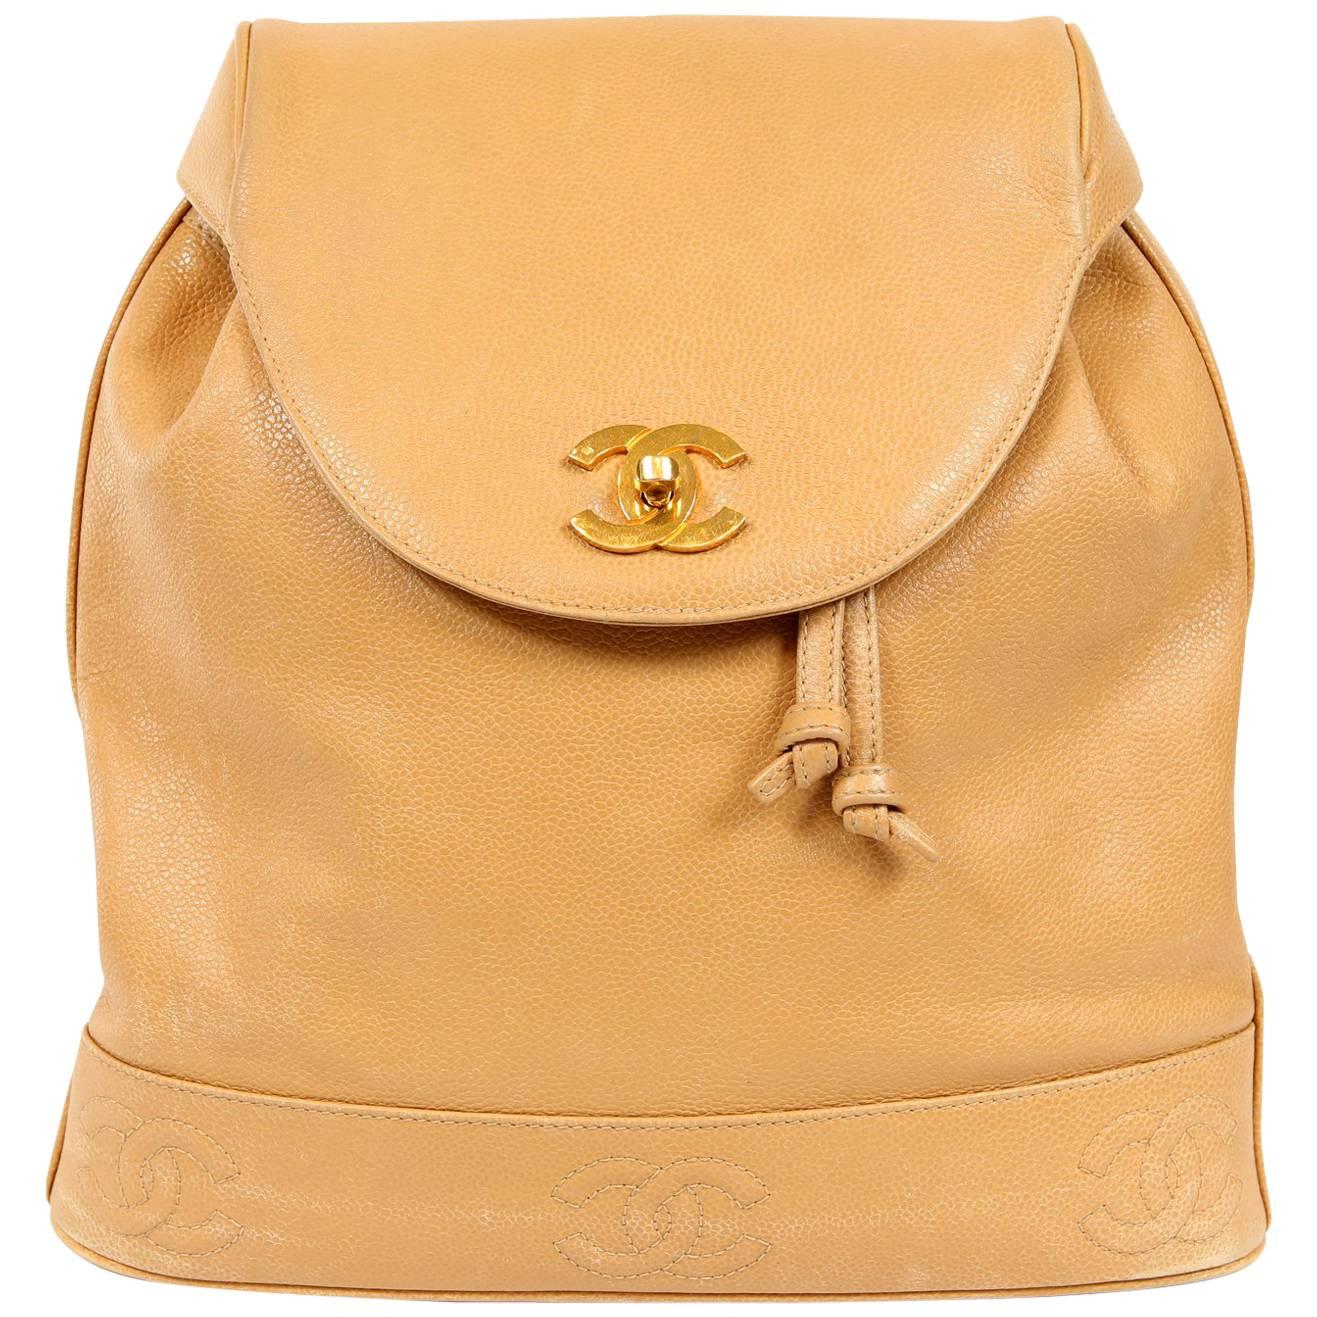 Chanel Camel Caviar Leather Backpack